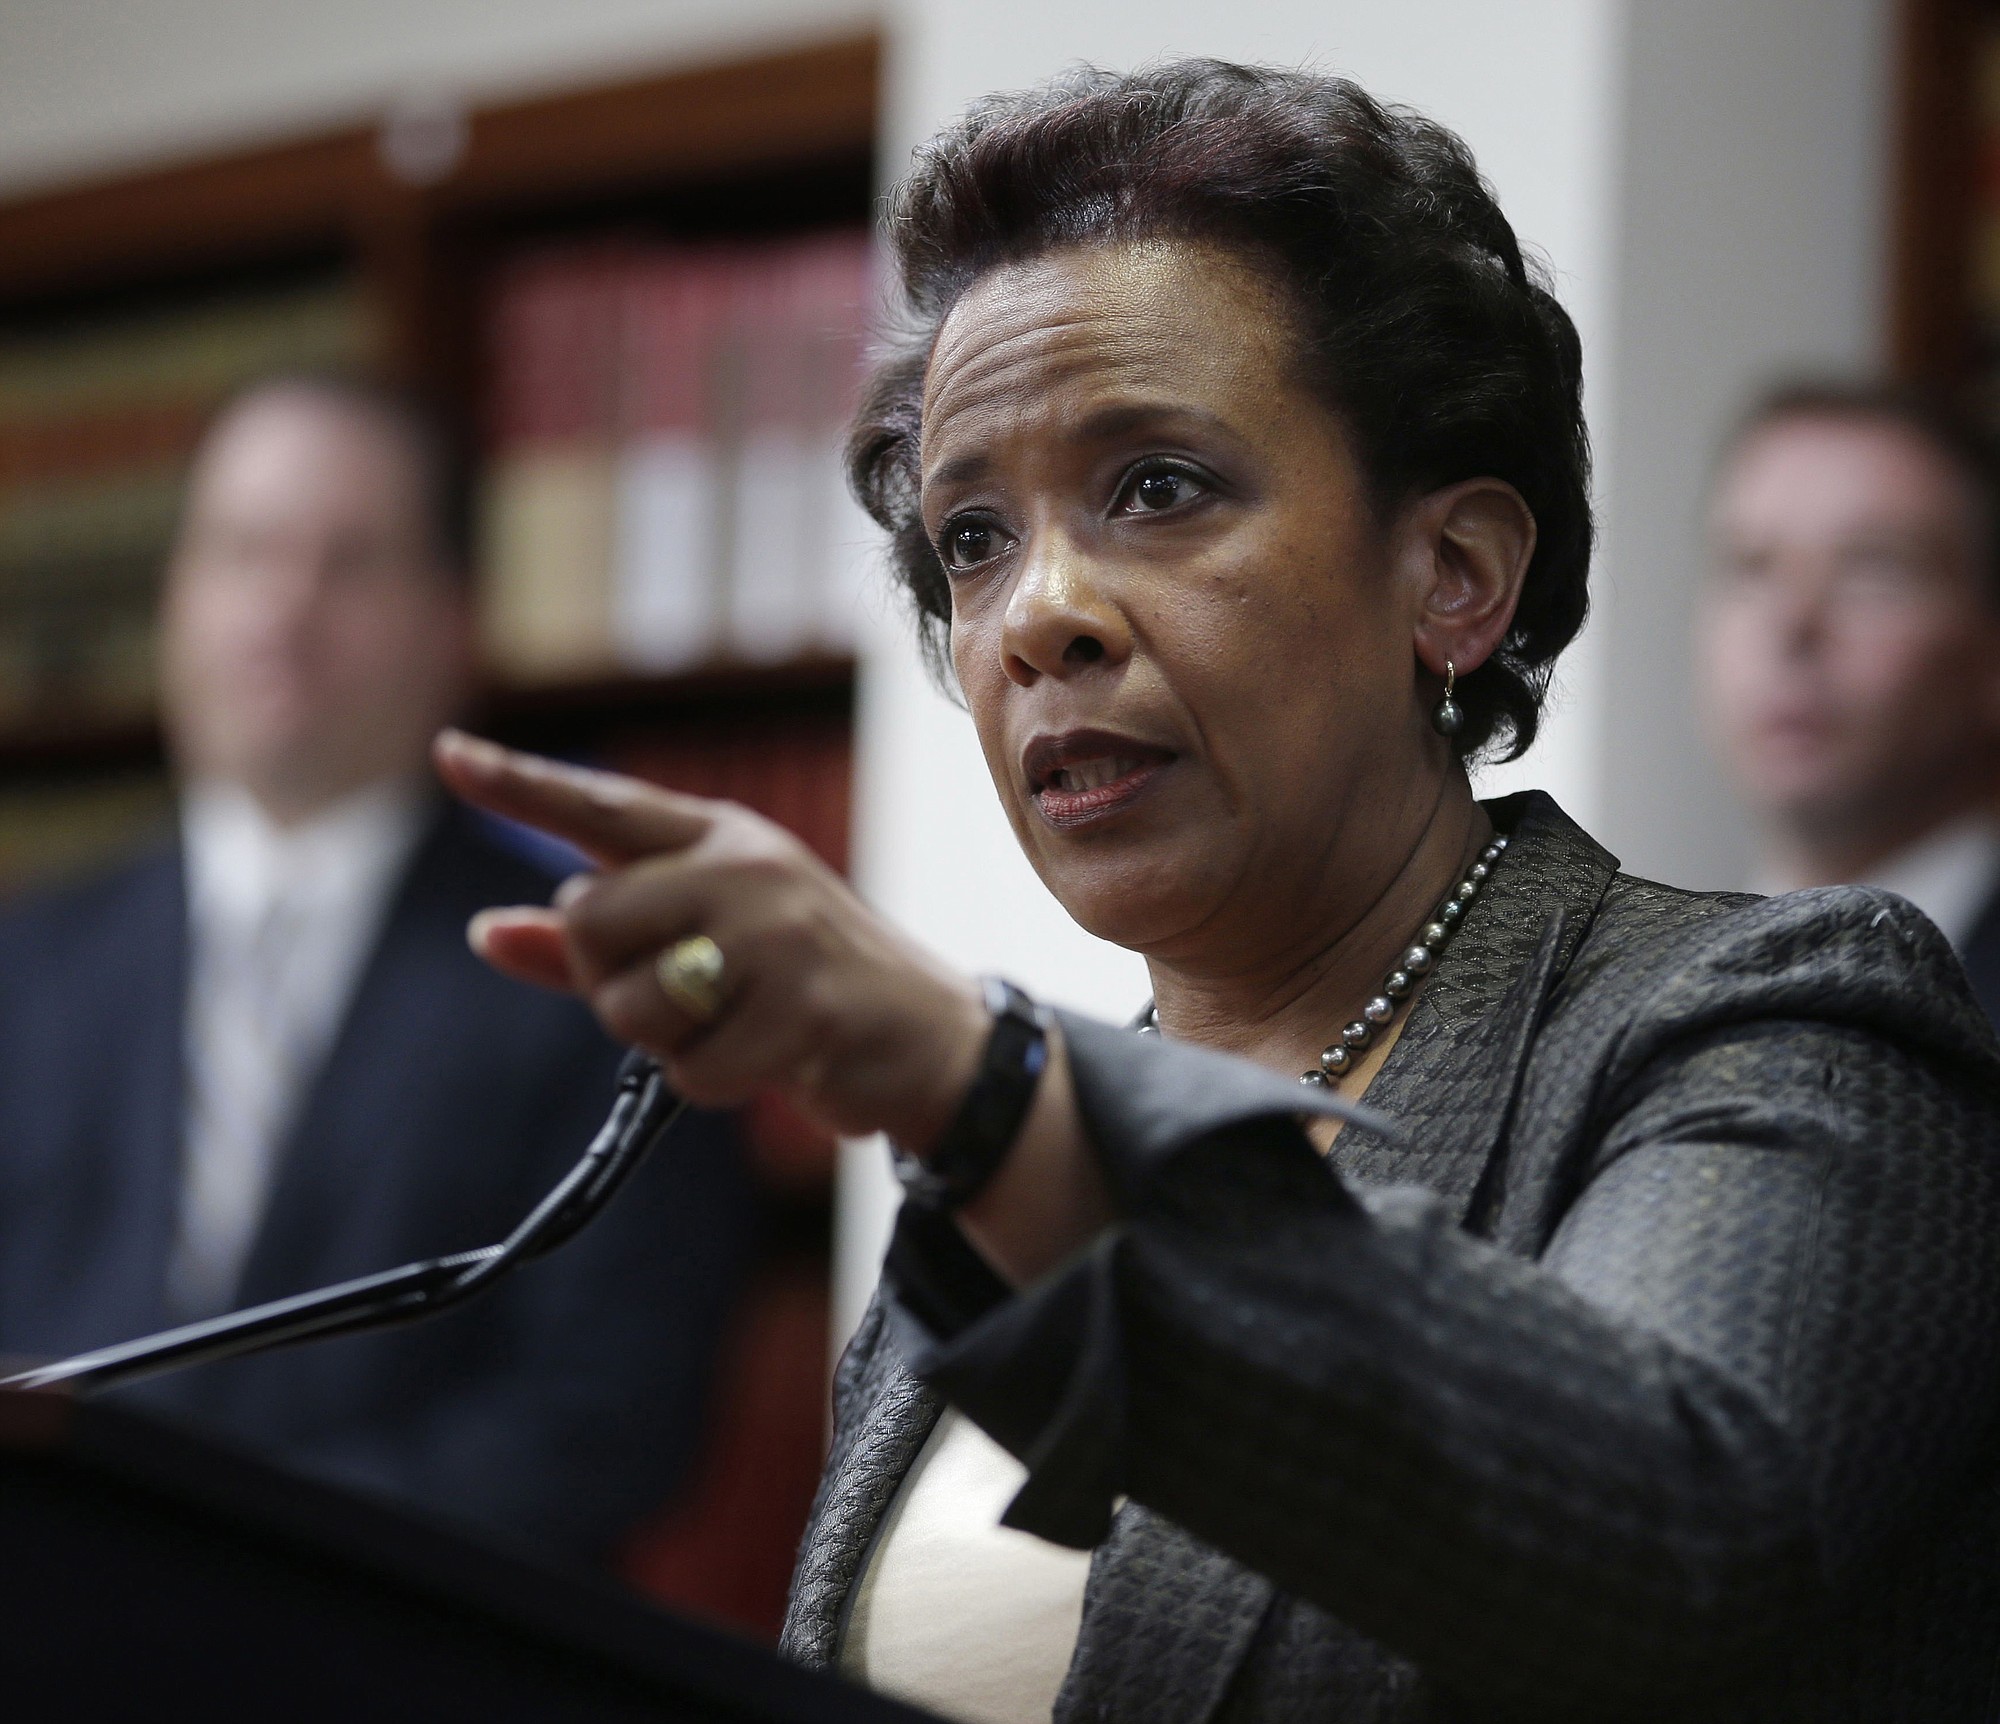 Loretta Lynch, U.S. attorney for the Eastern District of New York, speaks April 28 during a news conference in New York. Lynch has emerged as the leading choice to be the next attorney general, but President Barack Obama does not plan to make a nomination until after a trip to Asia next week.